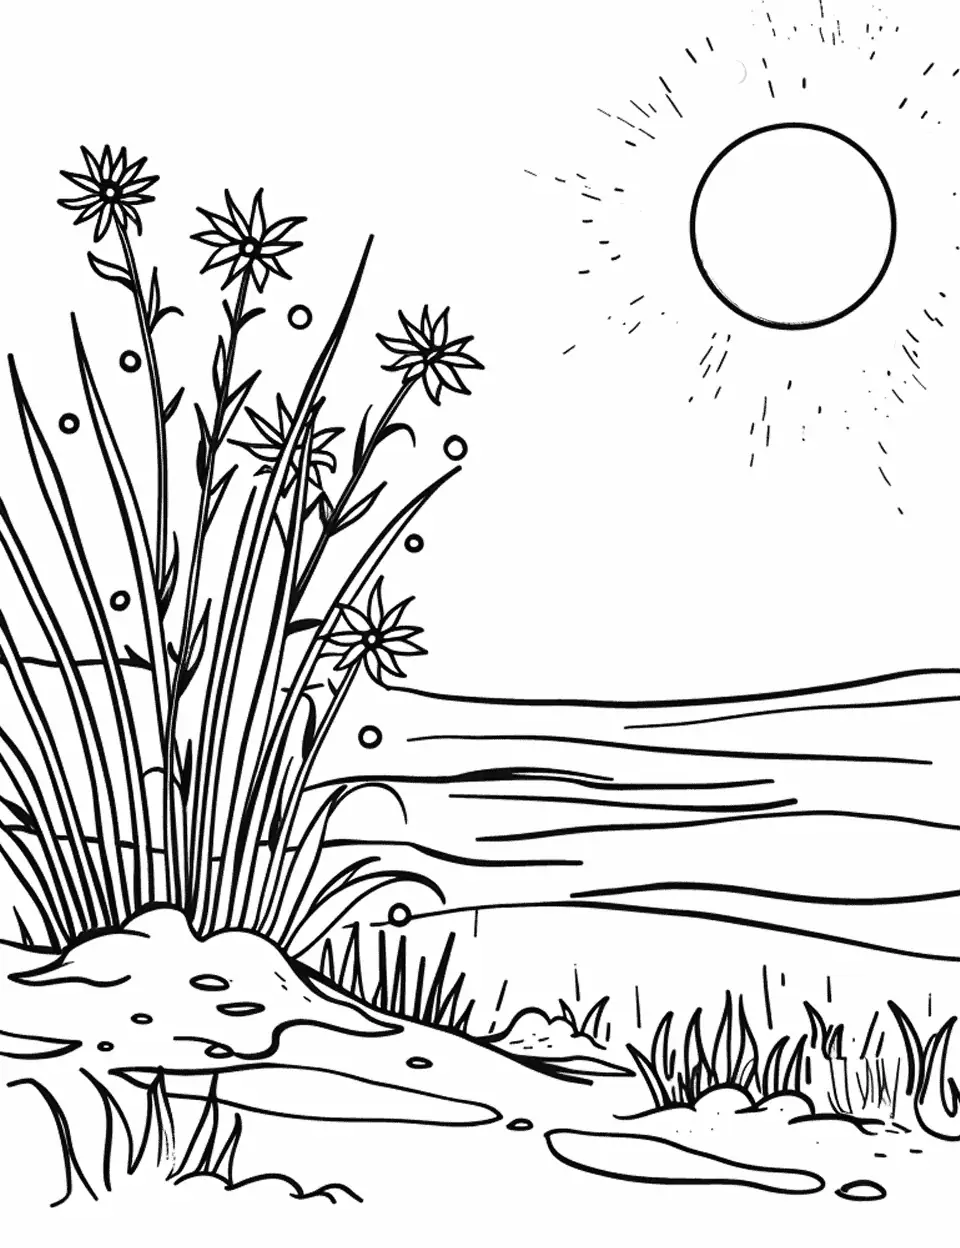 Spring Sun Melting Snow Coloring Page - The warm spring sun melting the last bits of snow, revealing grass beneath.